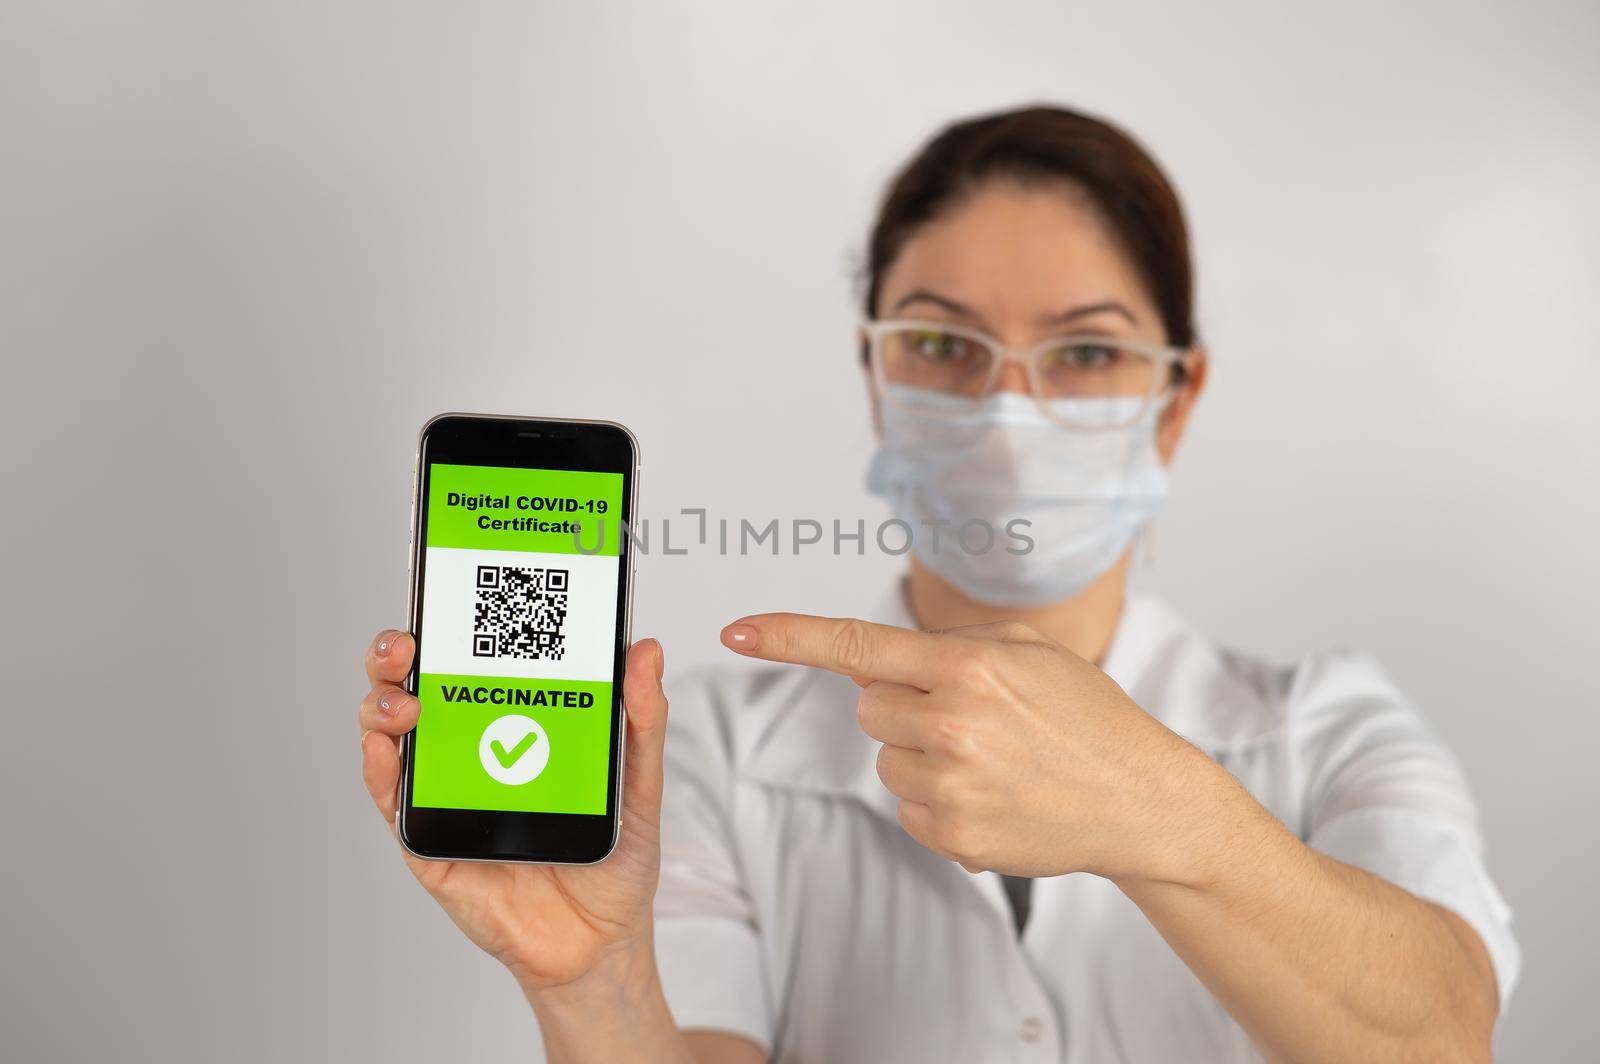 The doctor recommends vaccination and holds a smartphone with a QR code. by mrwed54